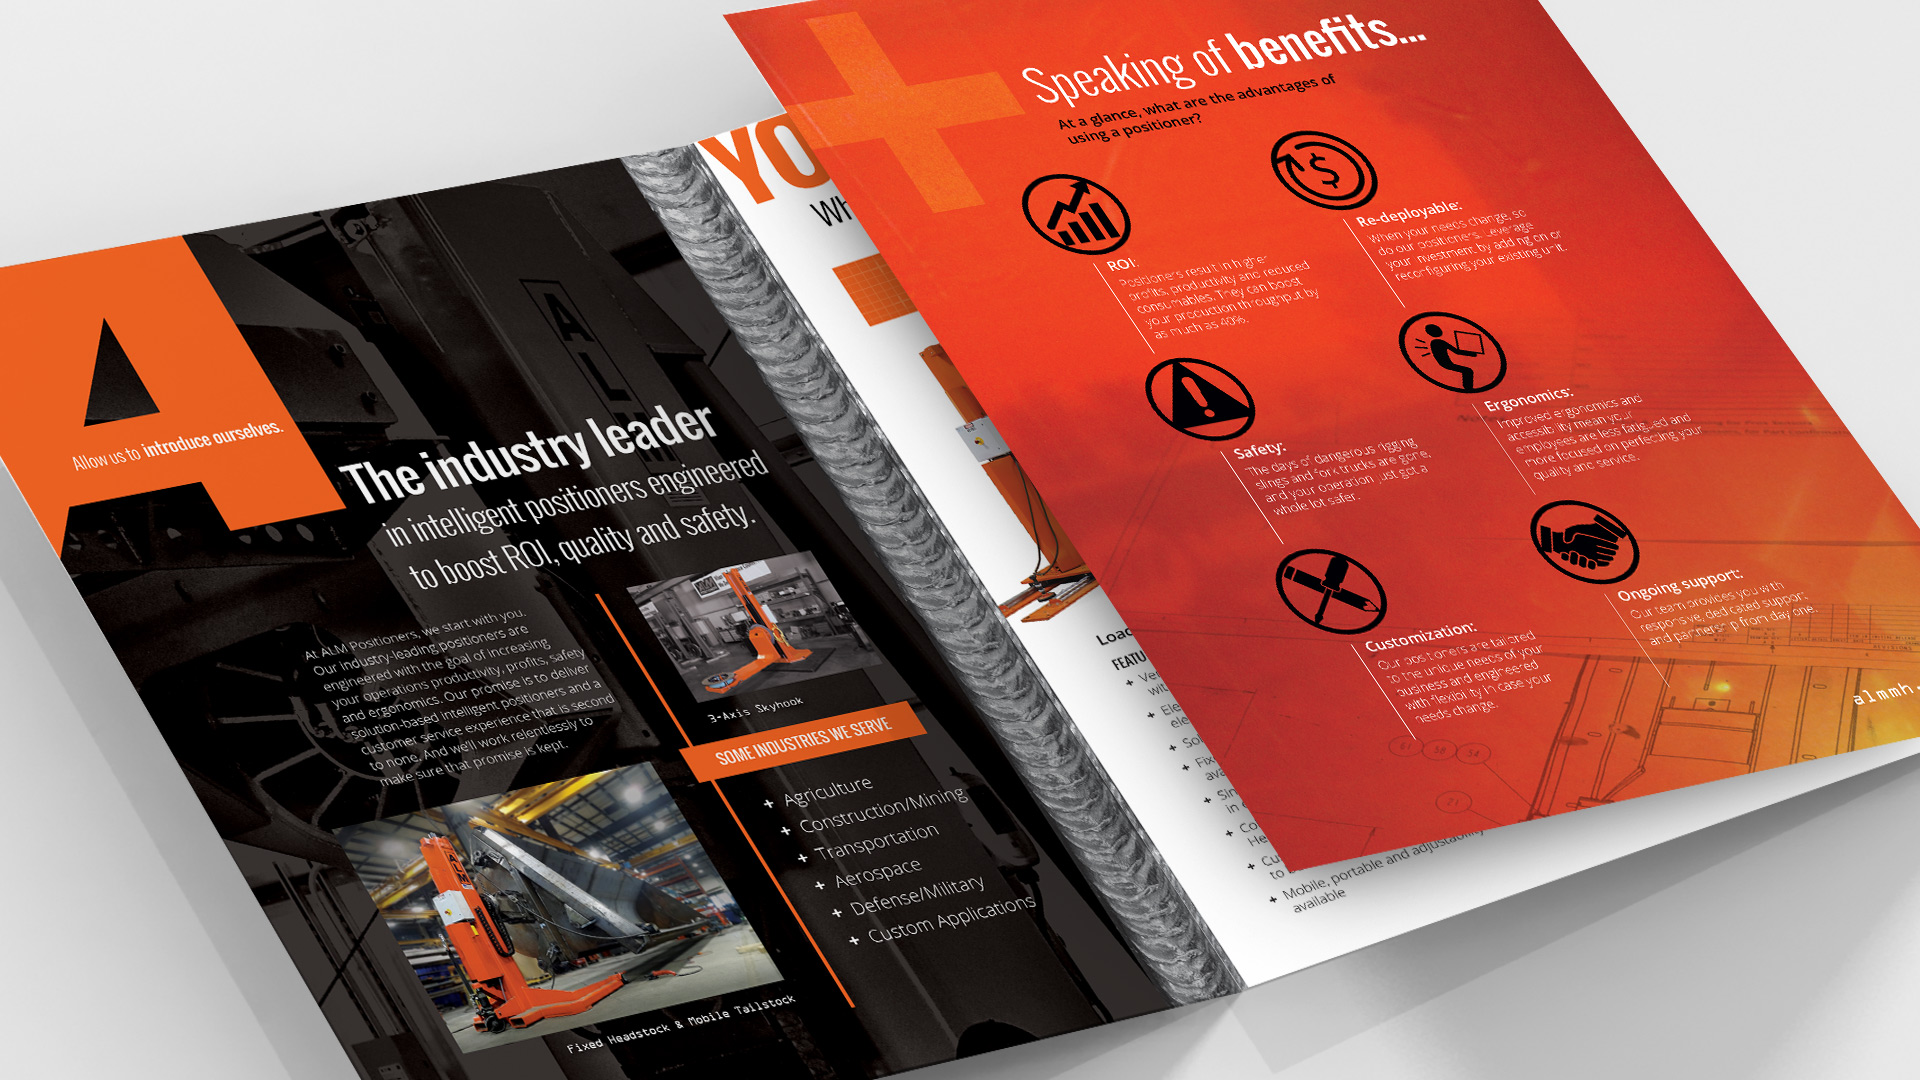 ALM sales brochure with clear visual identity